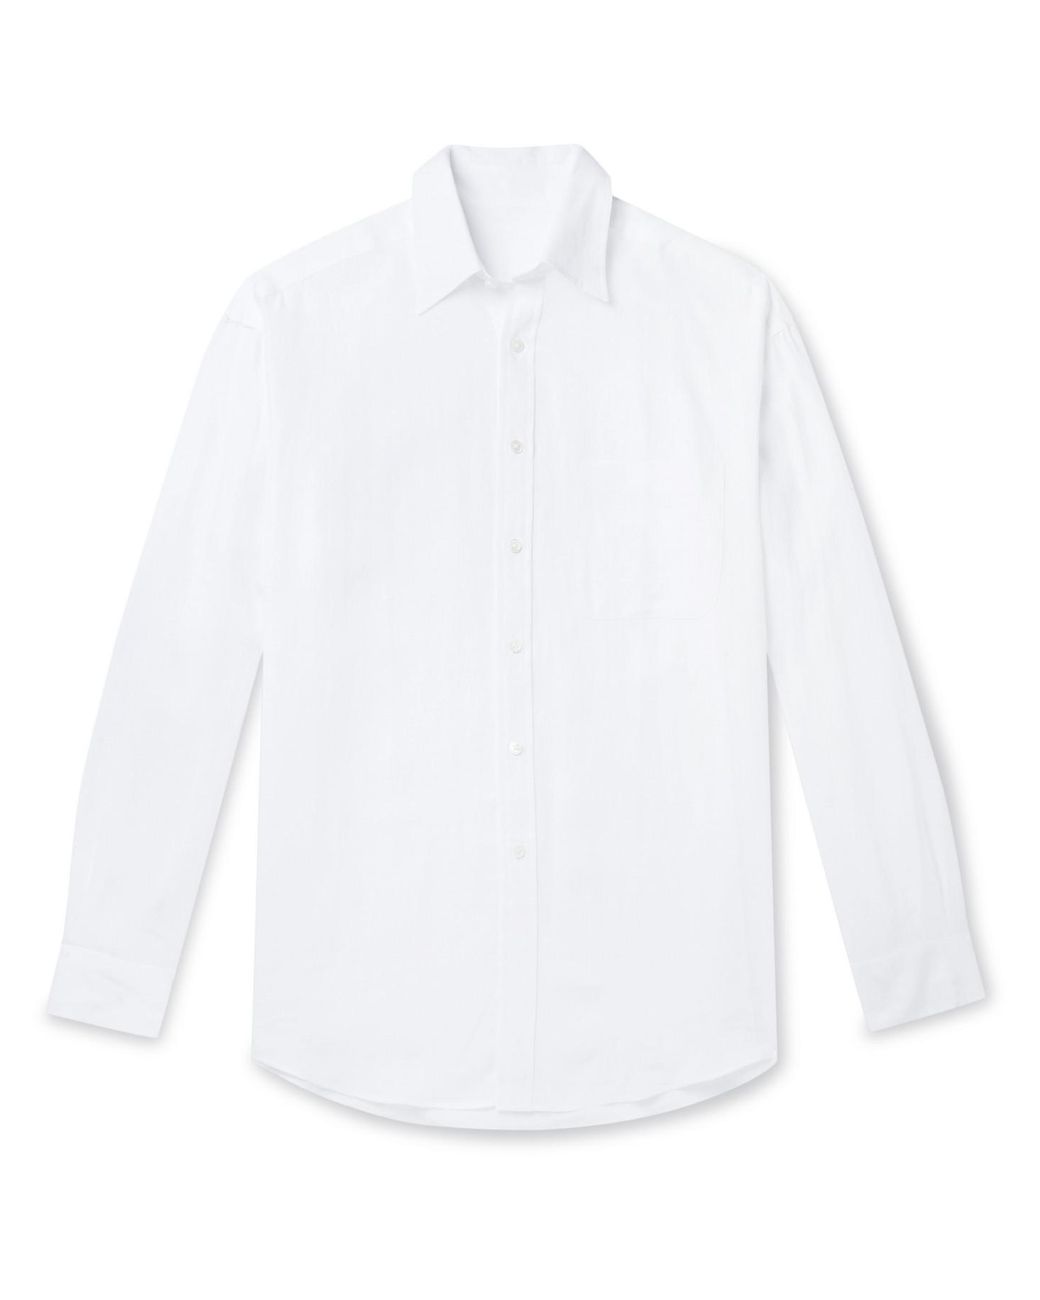 Anderson & Sheppard Linen Shirt in White for Men - Lyst